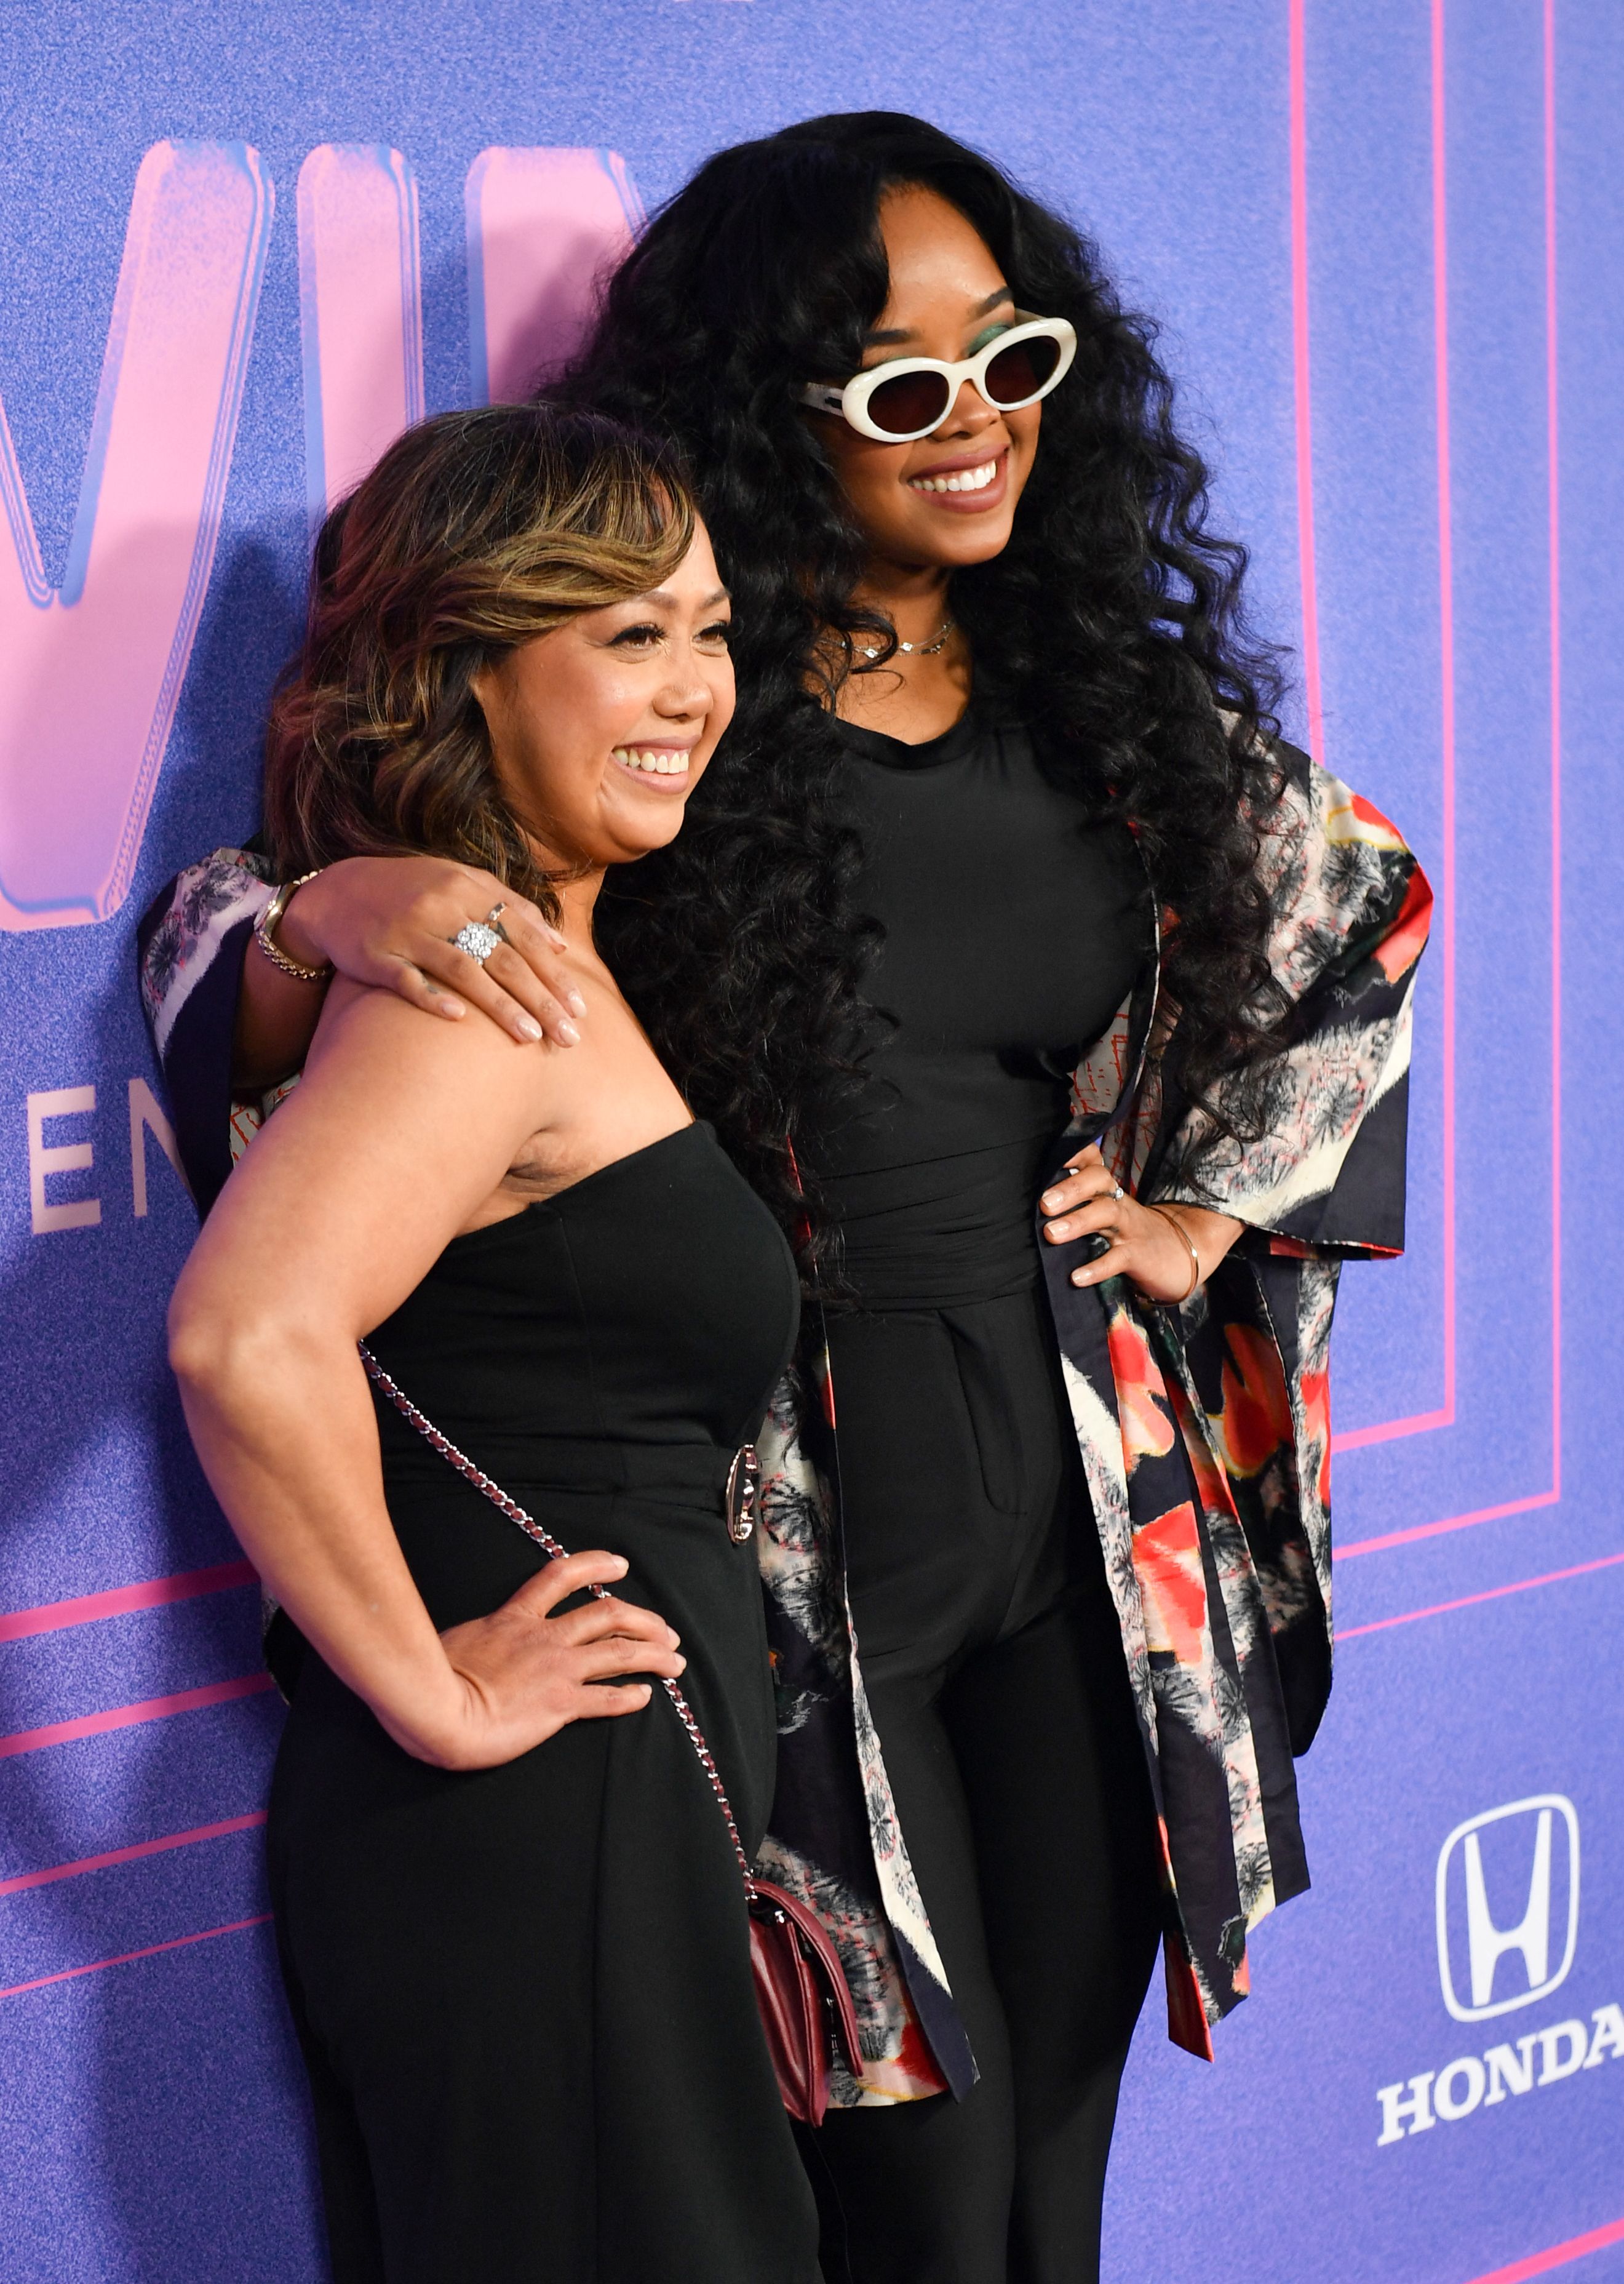 US singer-songwriter H.E.R. and her mother Agnes Wilson at SoFi stadium in Inglewood, California, March 2, 2022. | Source: Getty Images